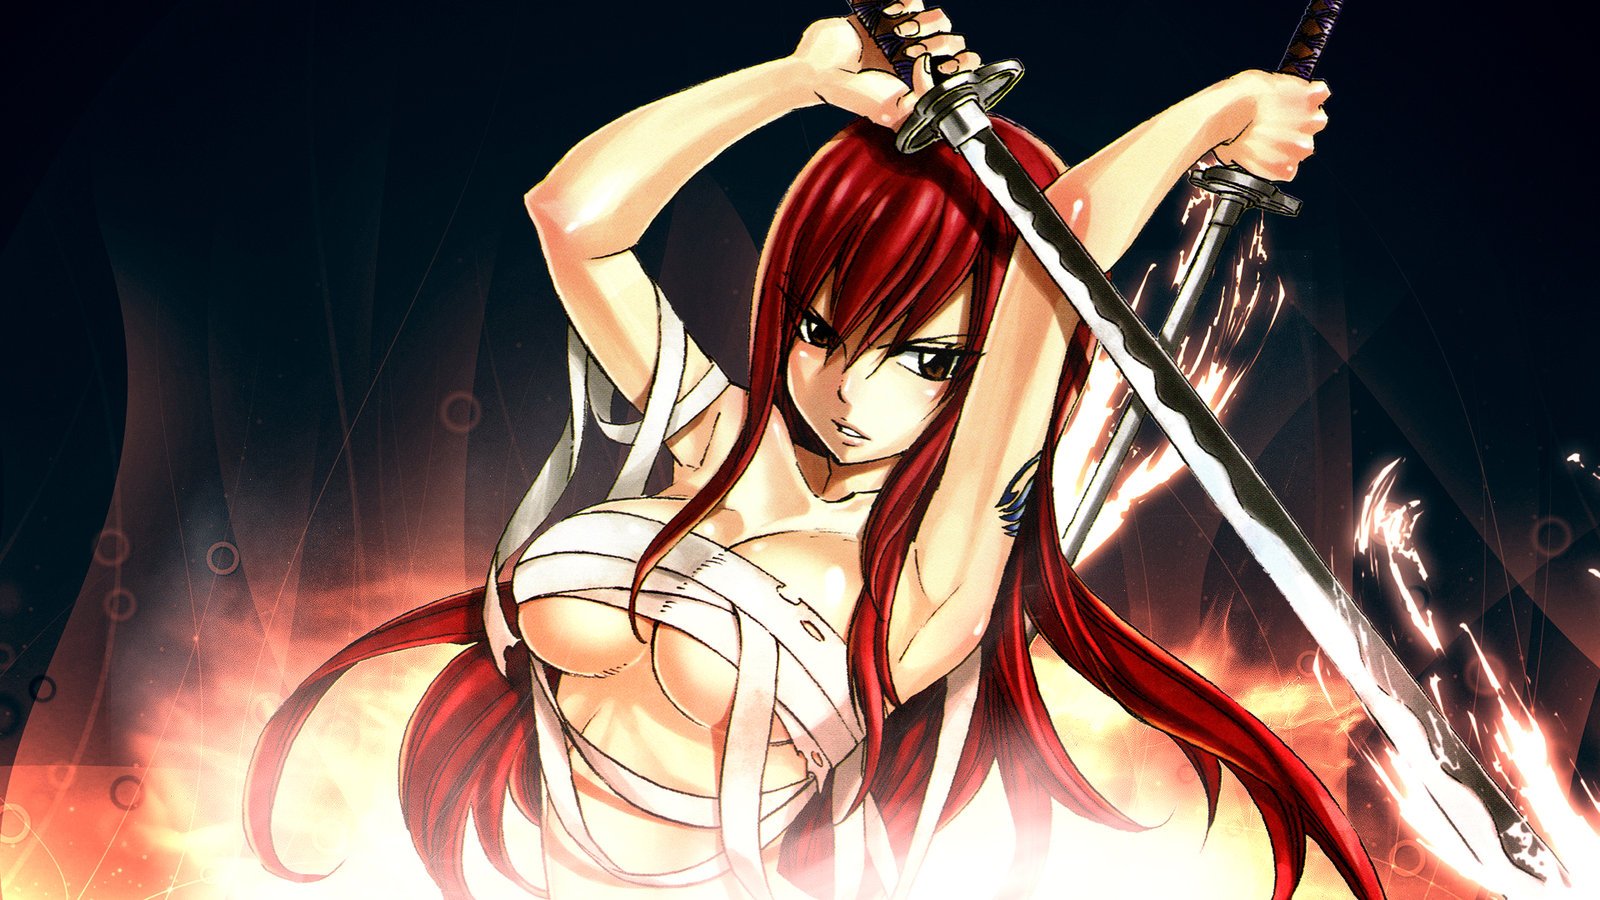 Art# 5 Anime Character Drawing Challenge Entry-2 Fairy Tail - Erza Scarlet.